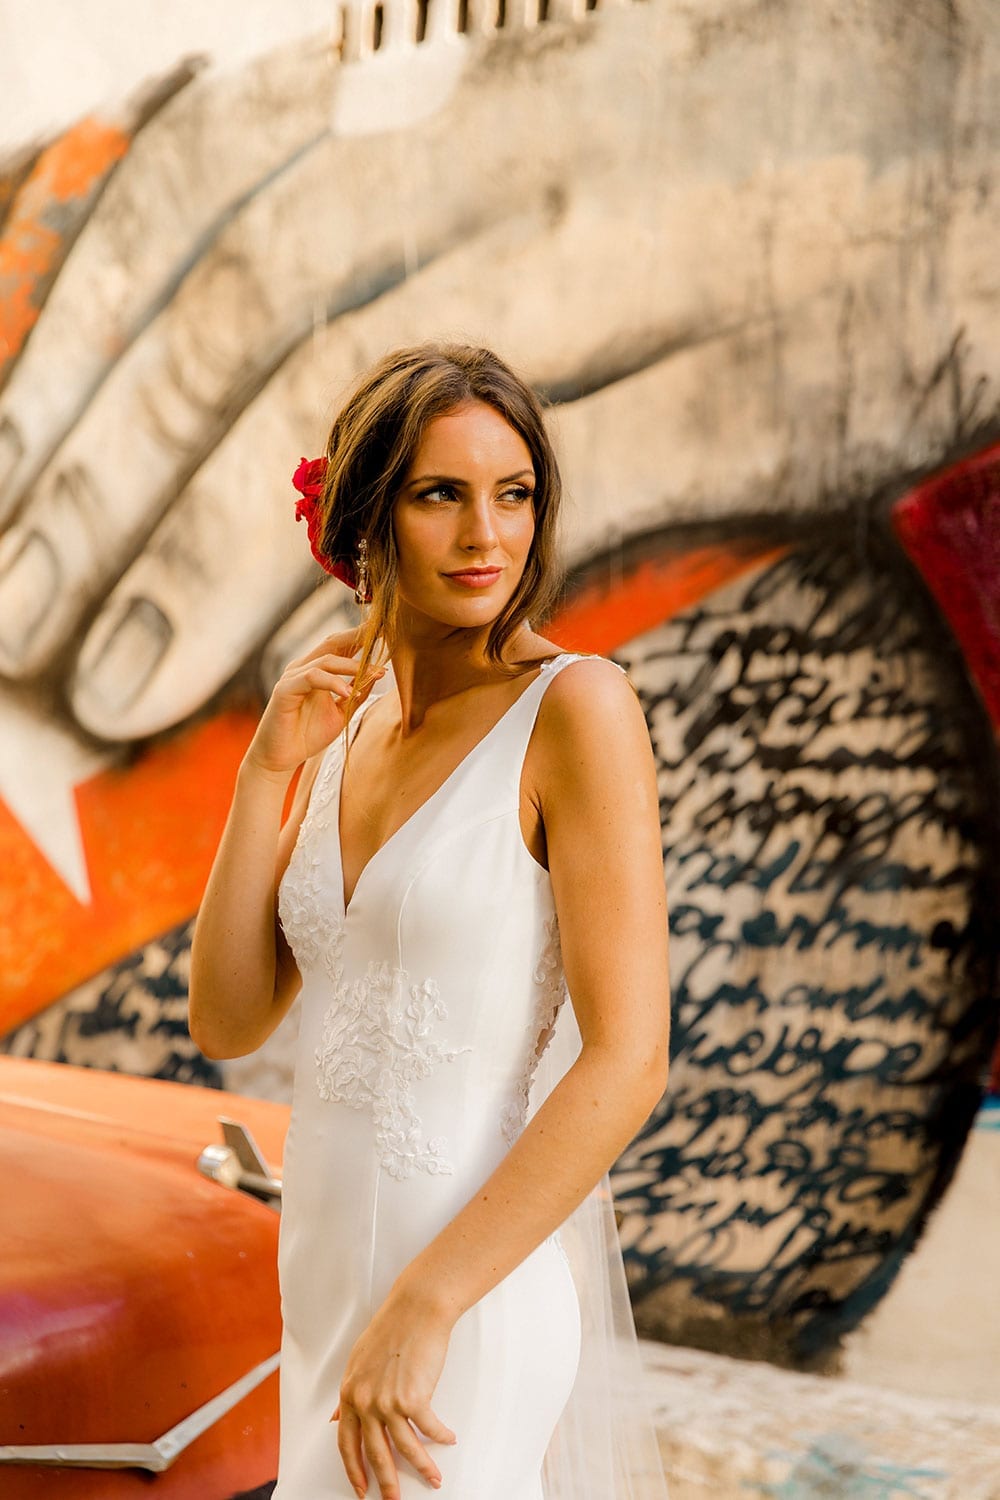 Model wearing Vinka Design Carmen Wedding Dress, a V Neck A-Line Wedding Gown worn on the streets of Havana with colourful walls